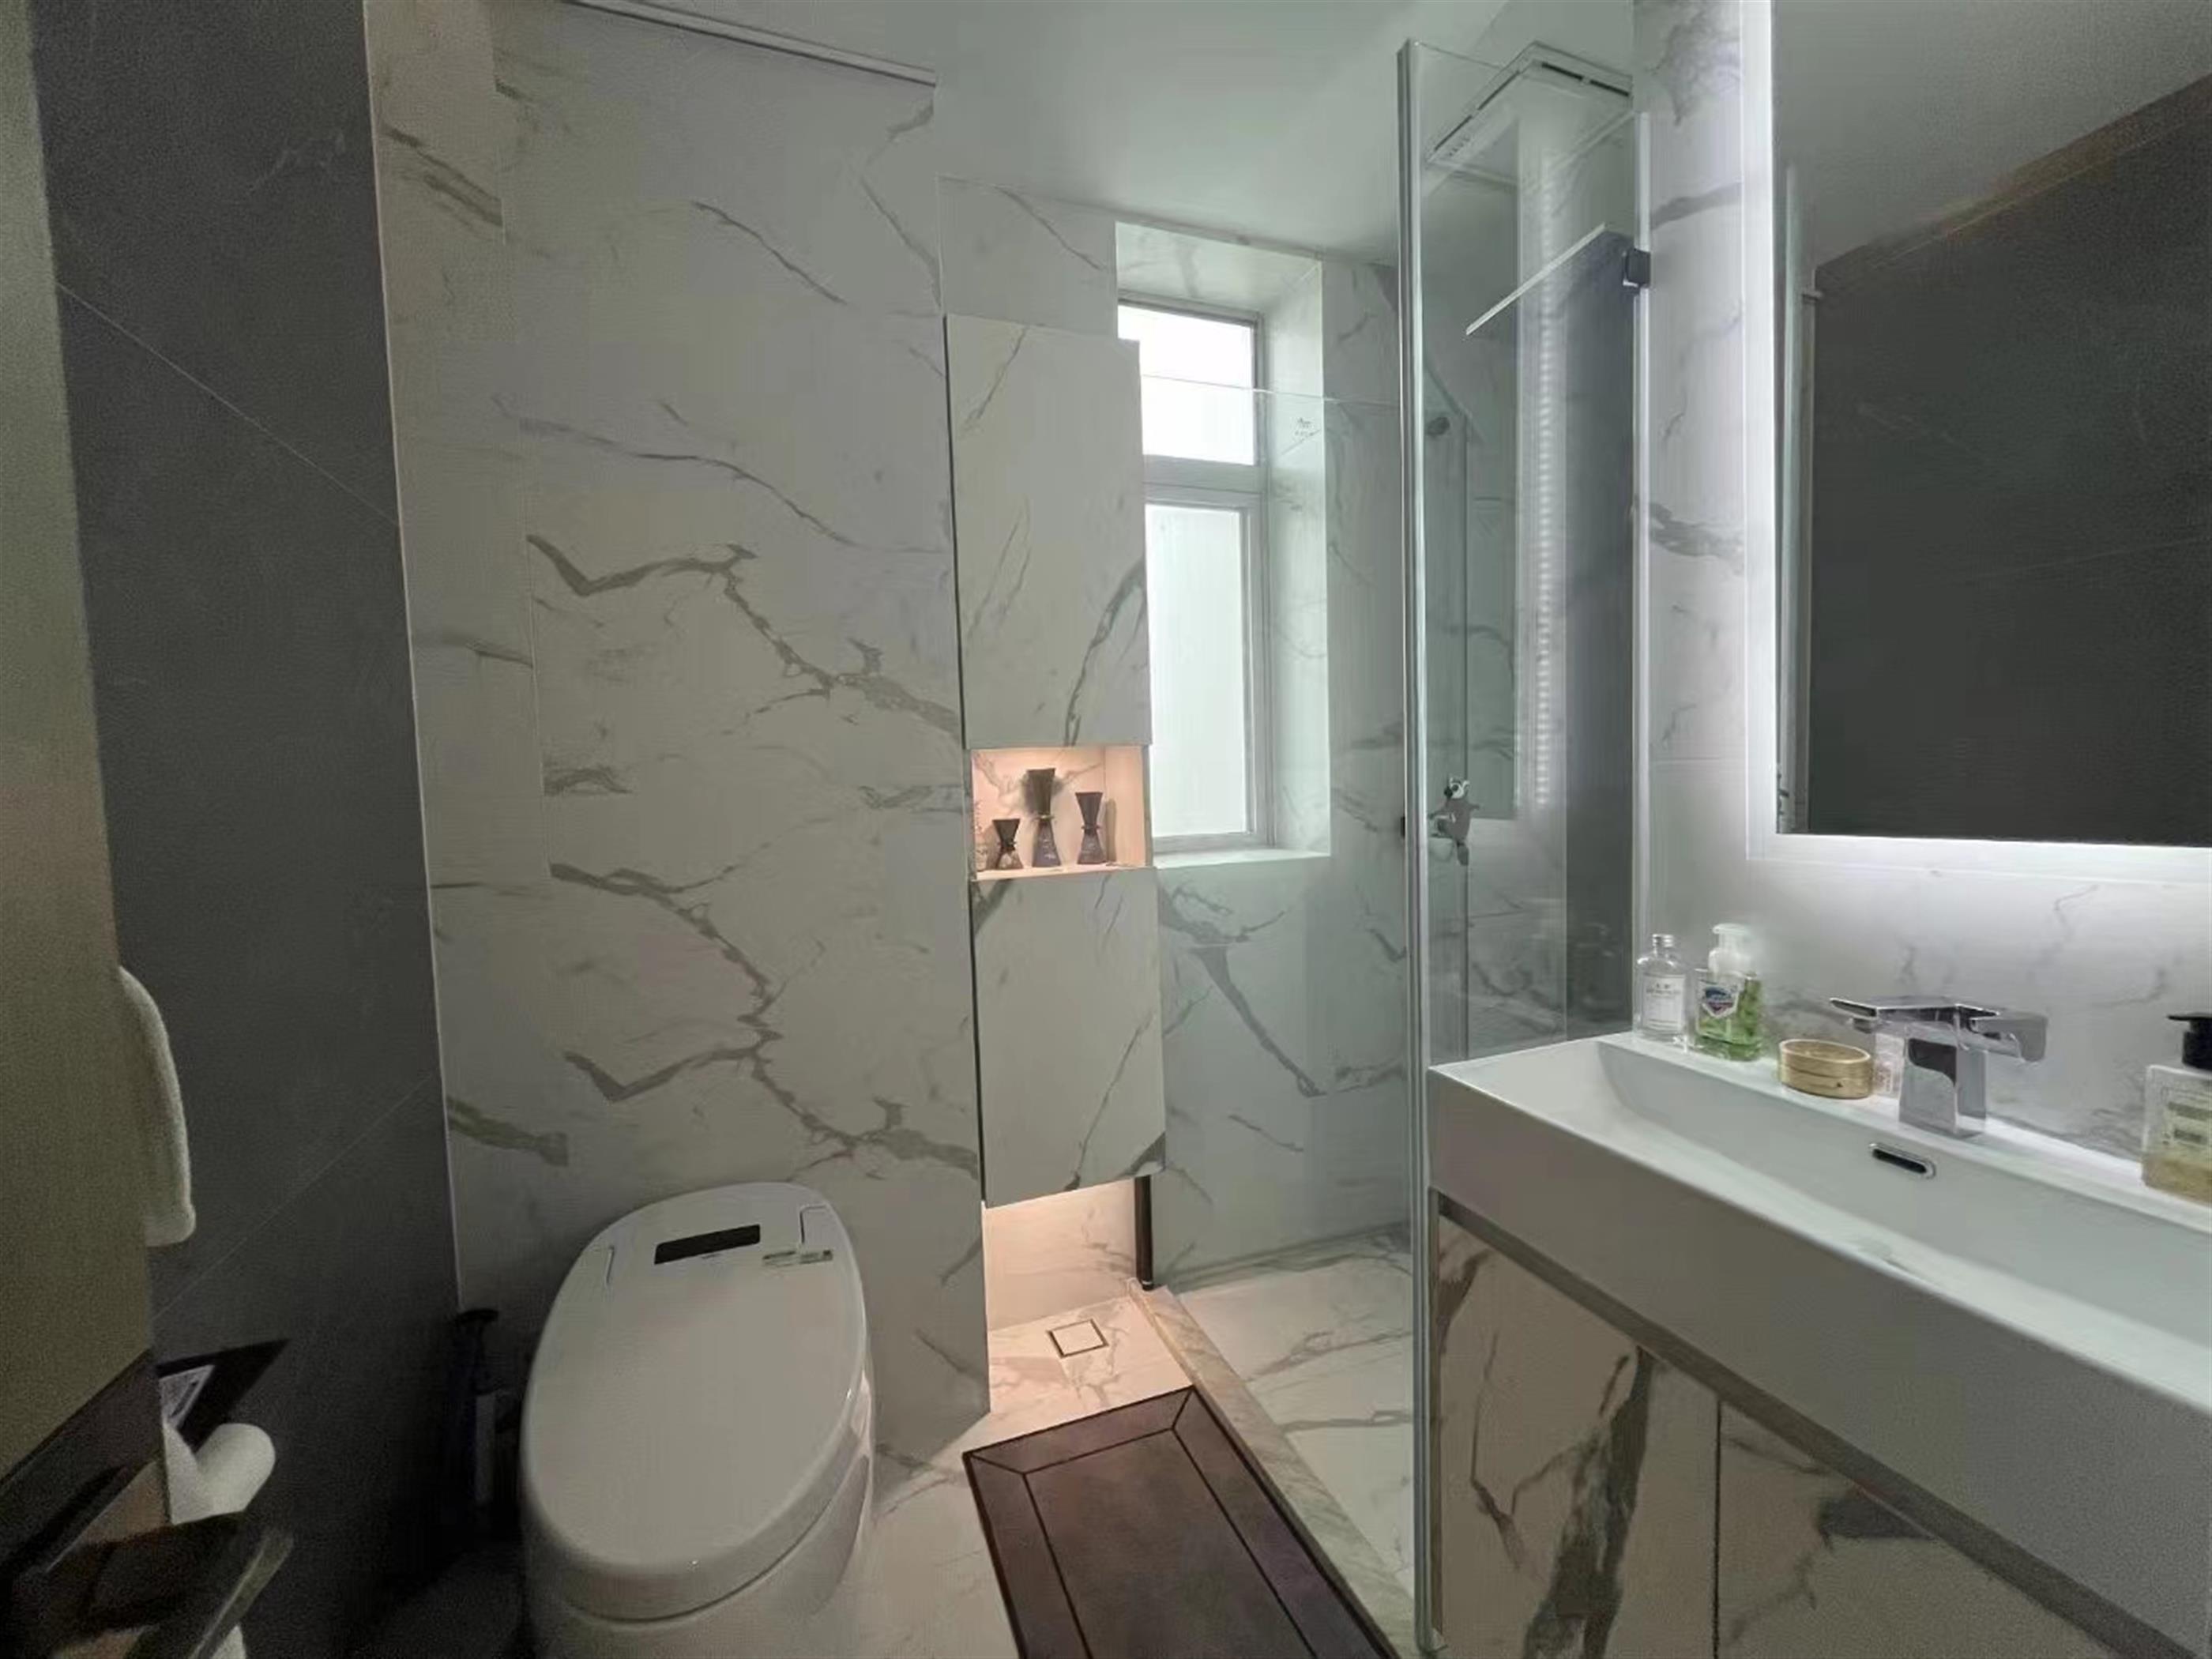 Beautiful shower and bathroom Classic Spacious Chic 3BR Apartment for Rent in Shanghai’s Jing’an Temple Neighborhood